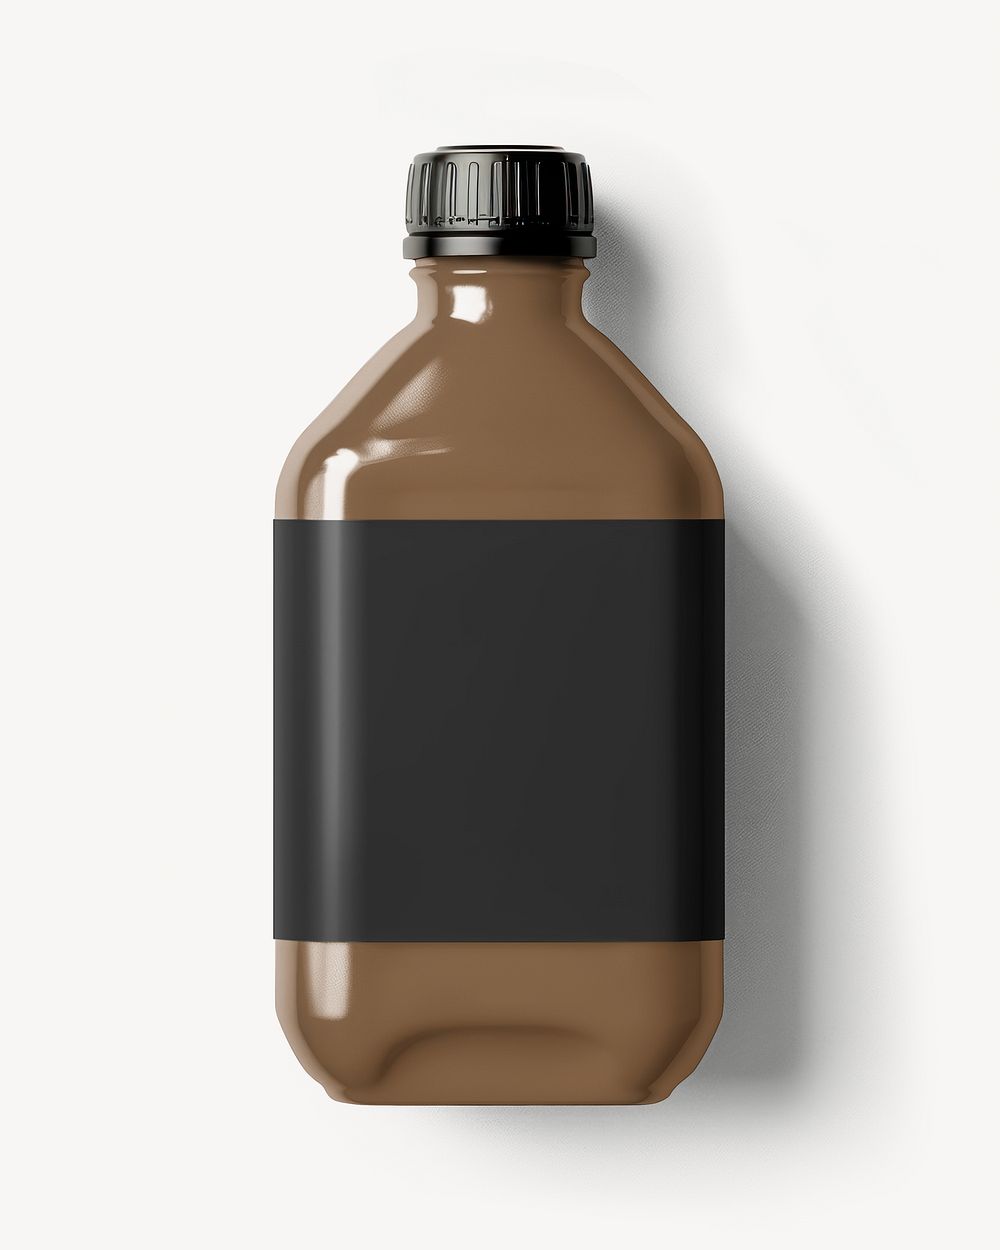 Chocolate bottle, product packaging flat lay